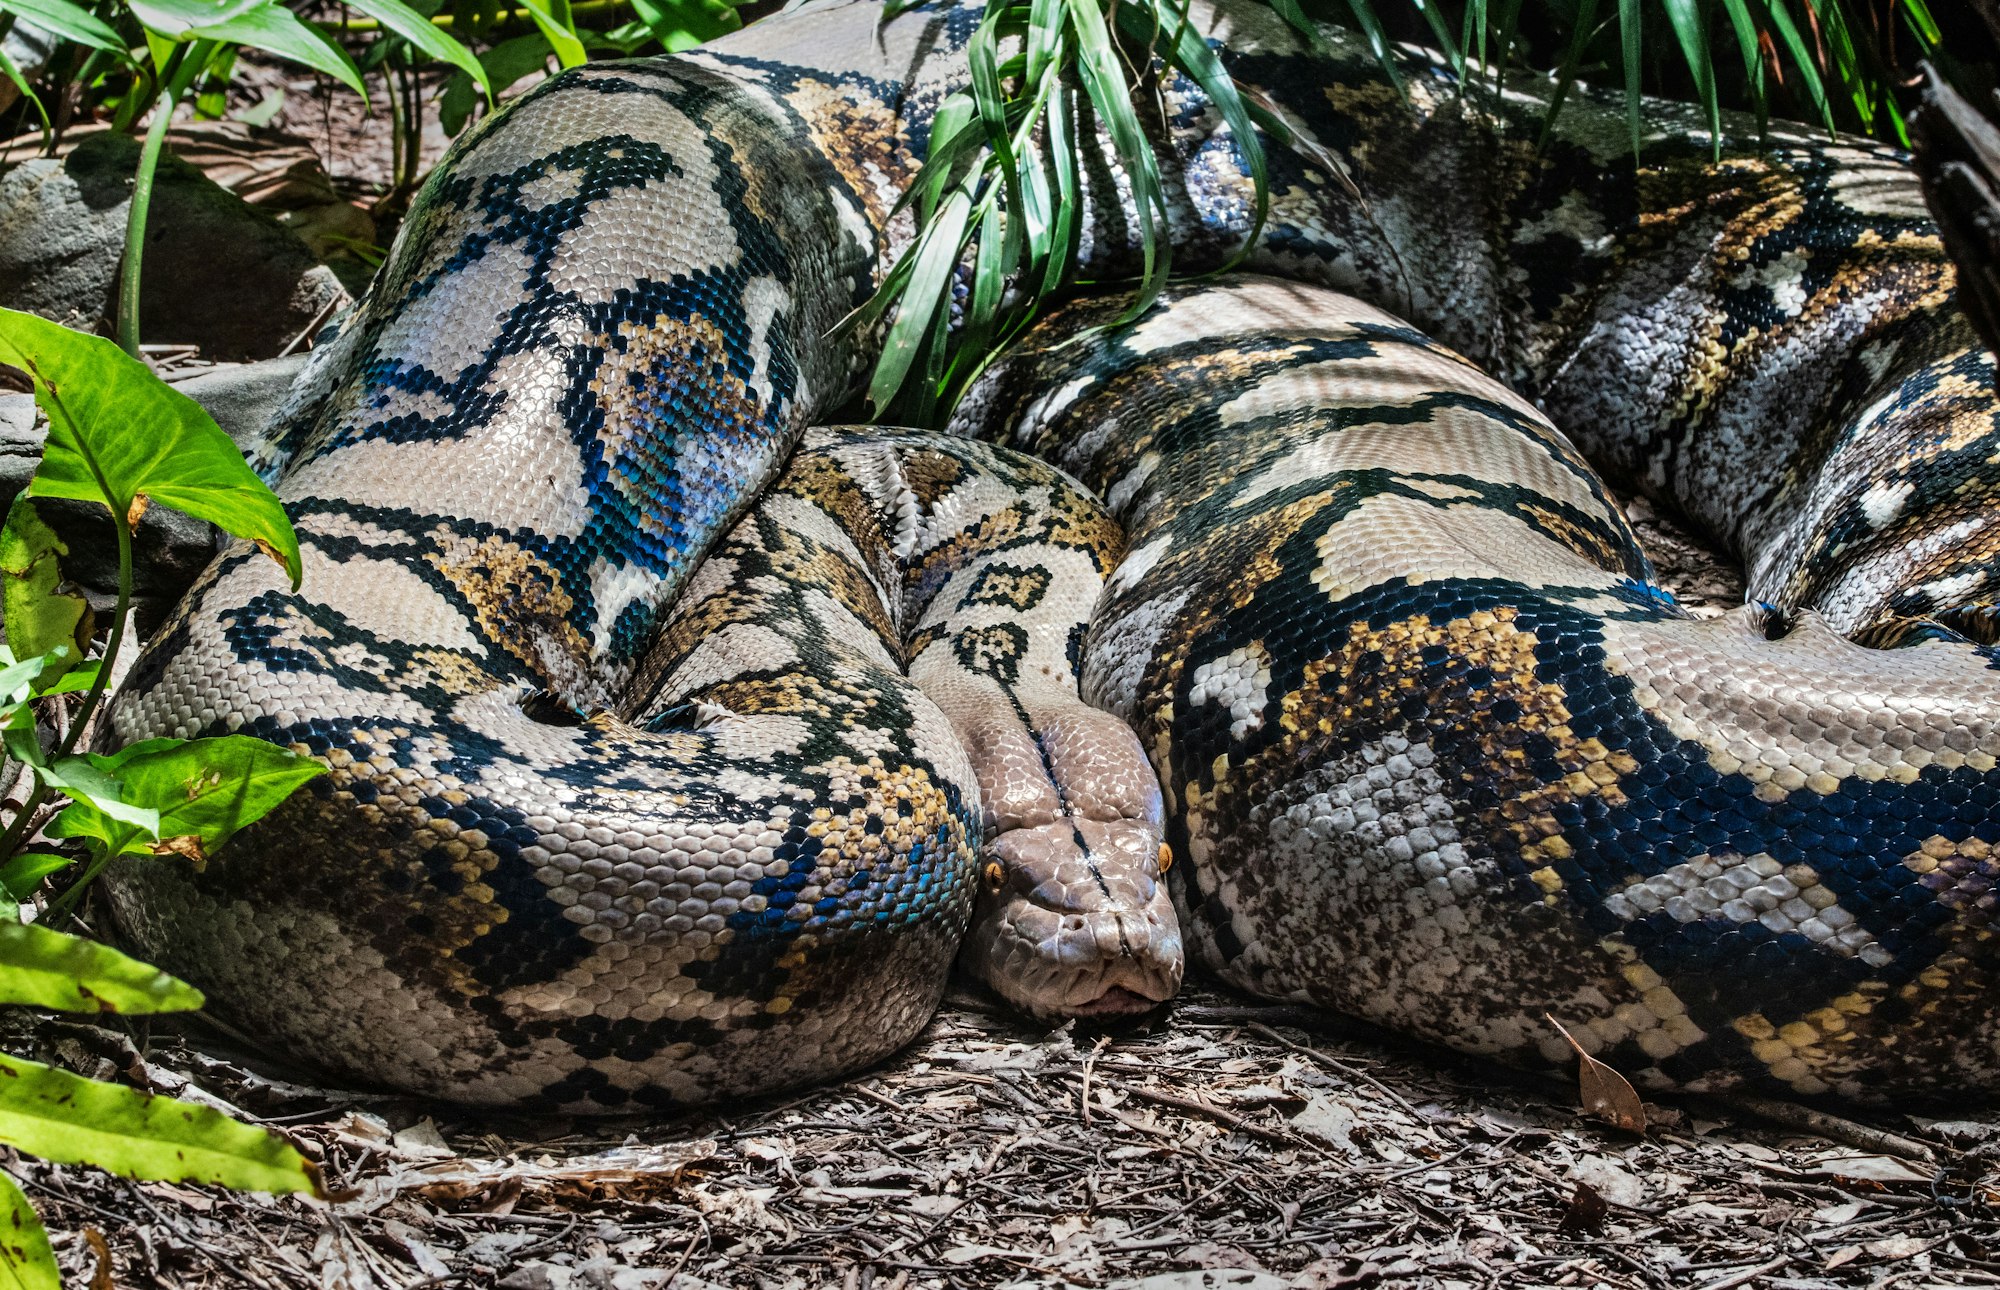 A massive Reticulated Python. This is the longest type of snake in the world.